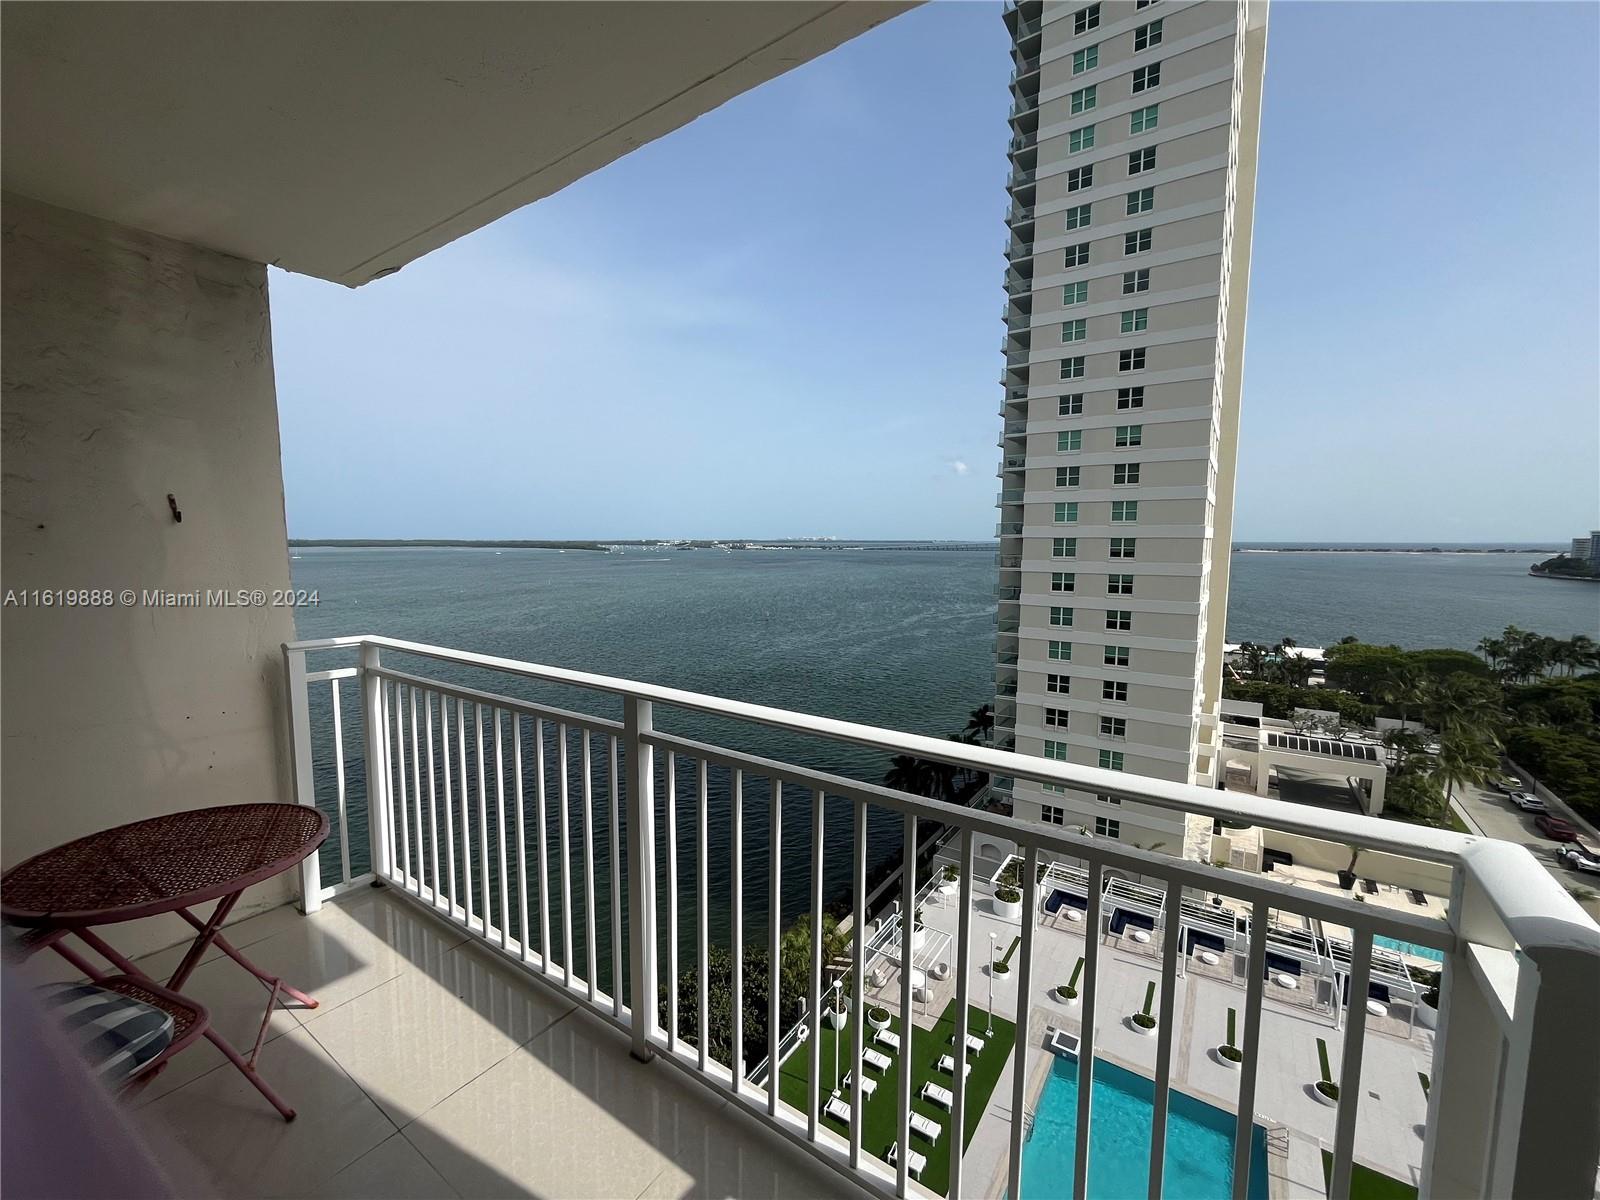 Updated two bedroom/ two bathroom unit, with a study. Porcelain, white tiles throughout, open kitchen, updated vanities in the bathrooms. South facing views of the open bay and Key Biscayne. Enjoy Isola's brand new, 4th floor amenities deck, including a pool, hot pool, BBQ's, tennis court, lounge garden, plus the gym, business center, party salon, with direct bay view. Live on exclusive Brickell Key, with an amazing 1.25 mile boardwalk, a dog park, a children's playground, and Islander market place, the Brasserie restaurant, as well as , brand new sushi restaurant. Close to the center of Brickell and Brickell City Center. Island living at its best! The owner is offering owner finiancing.